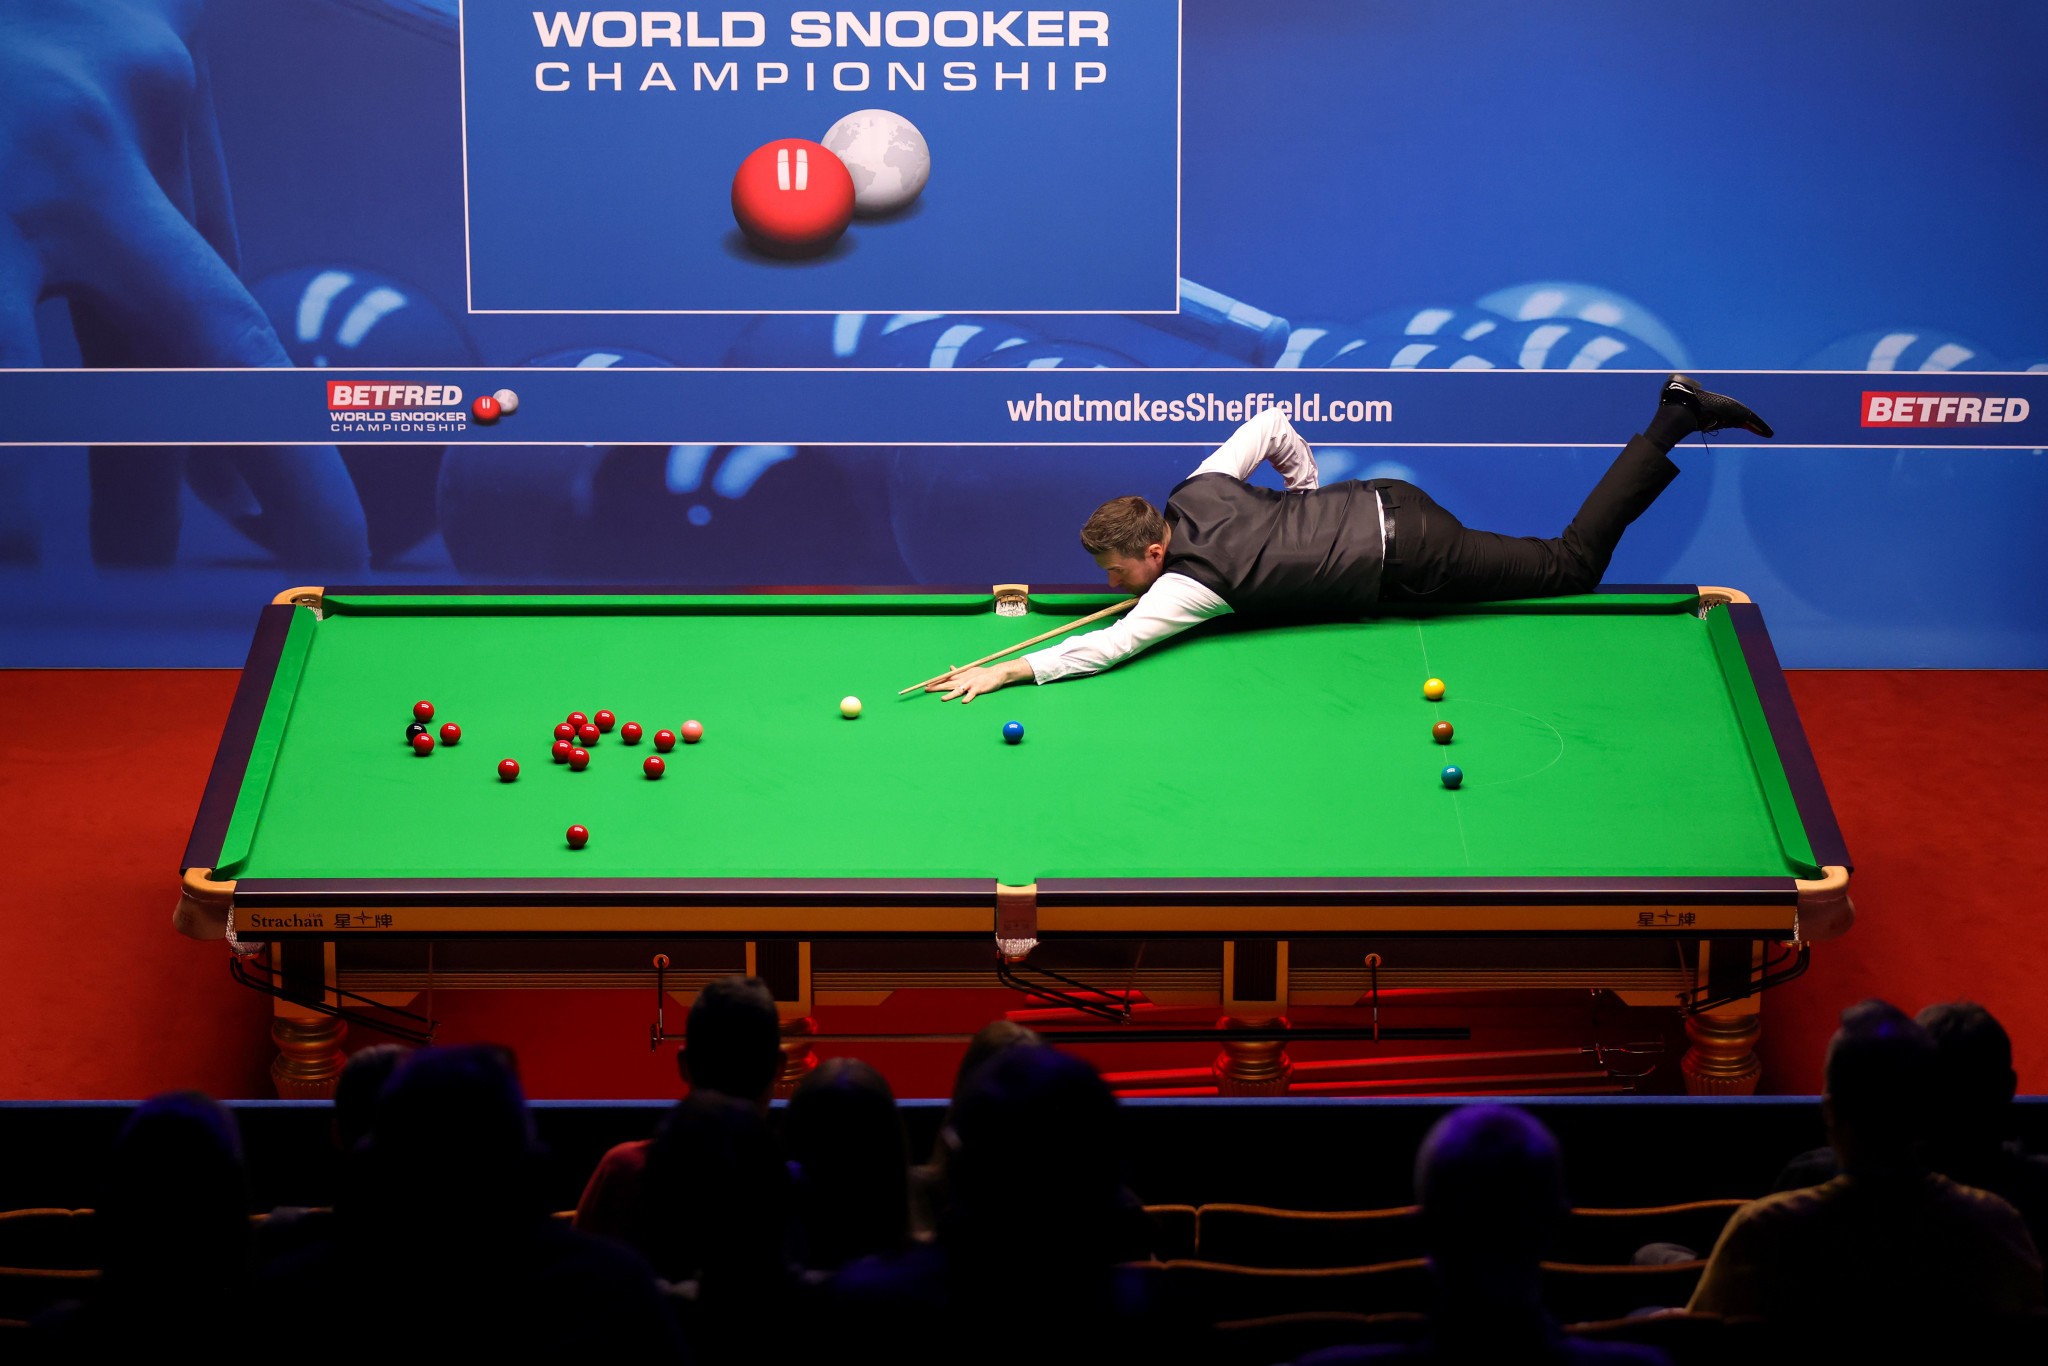 Three-time world champion Mark Selby said he was playing 